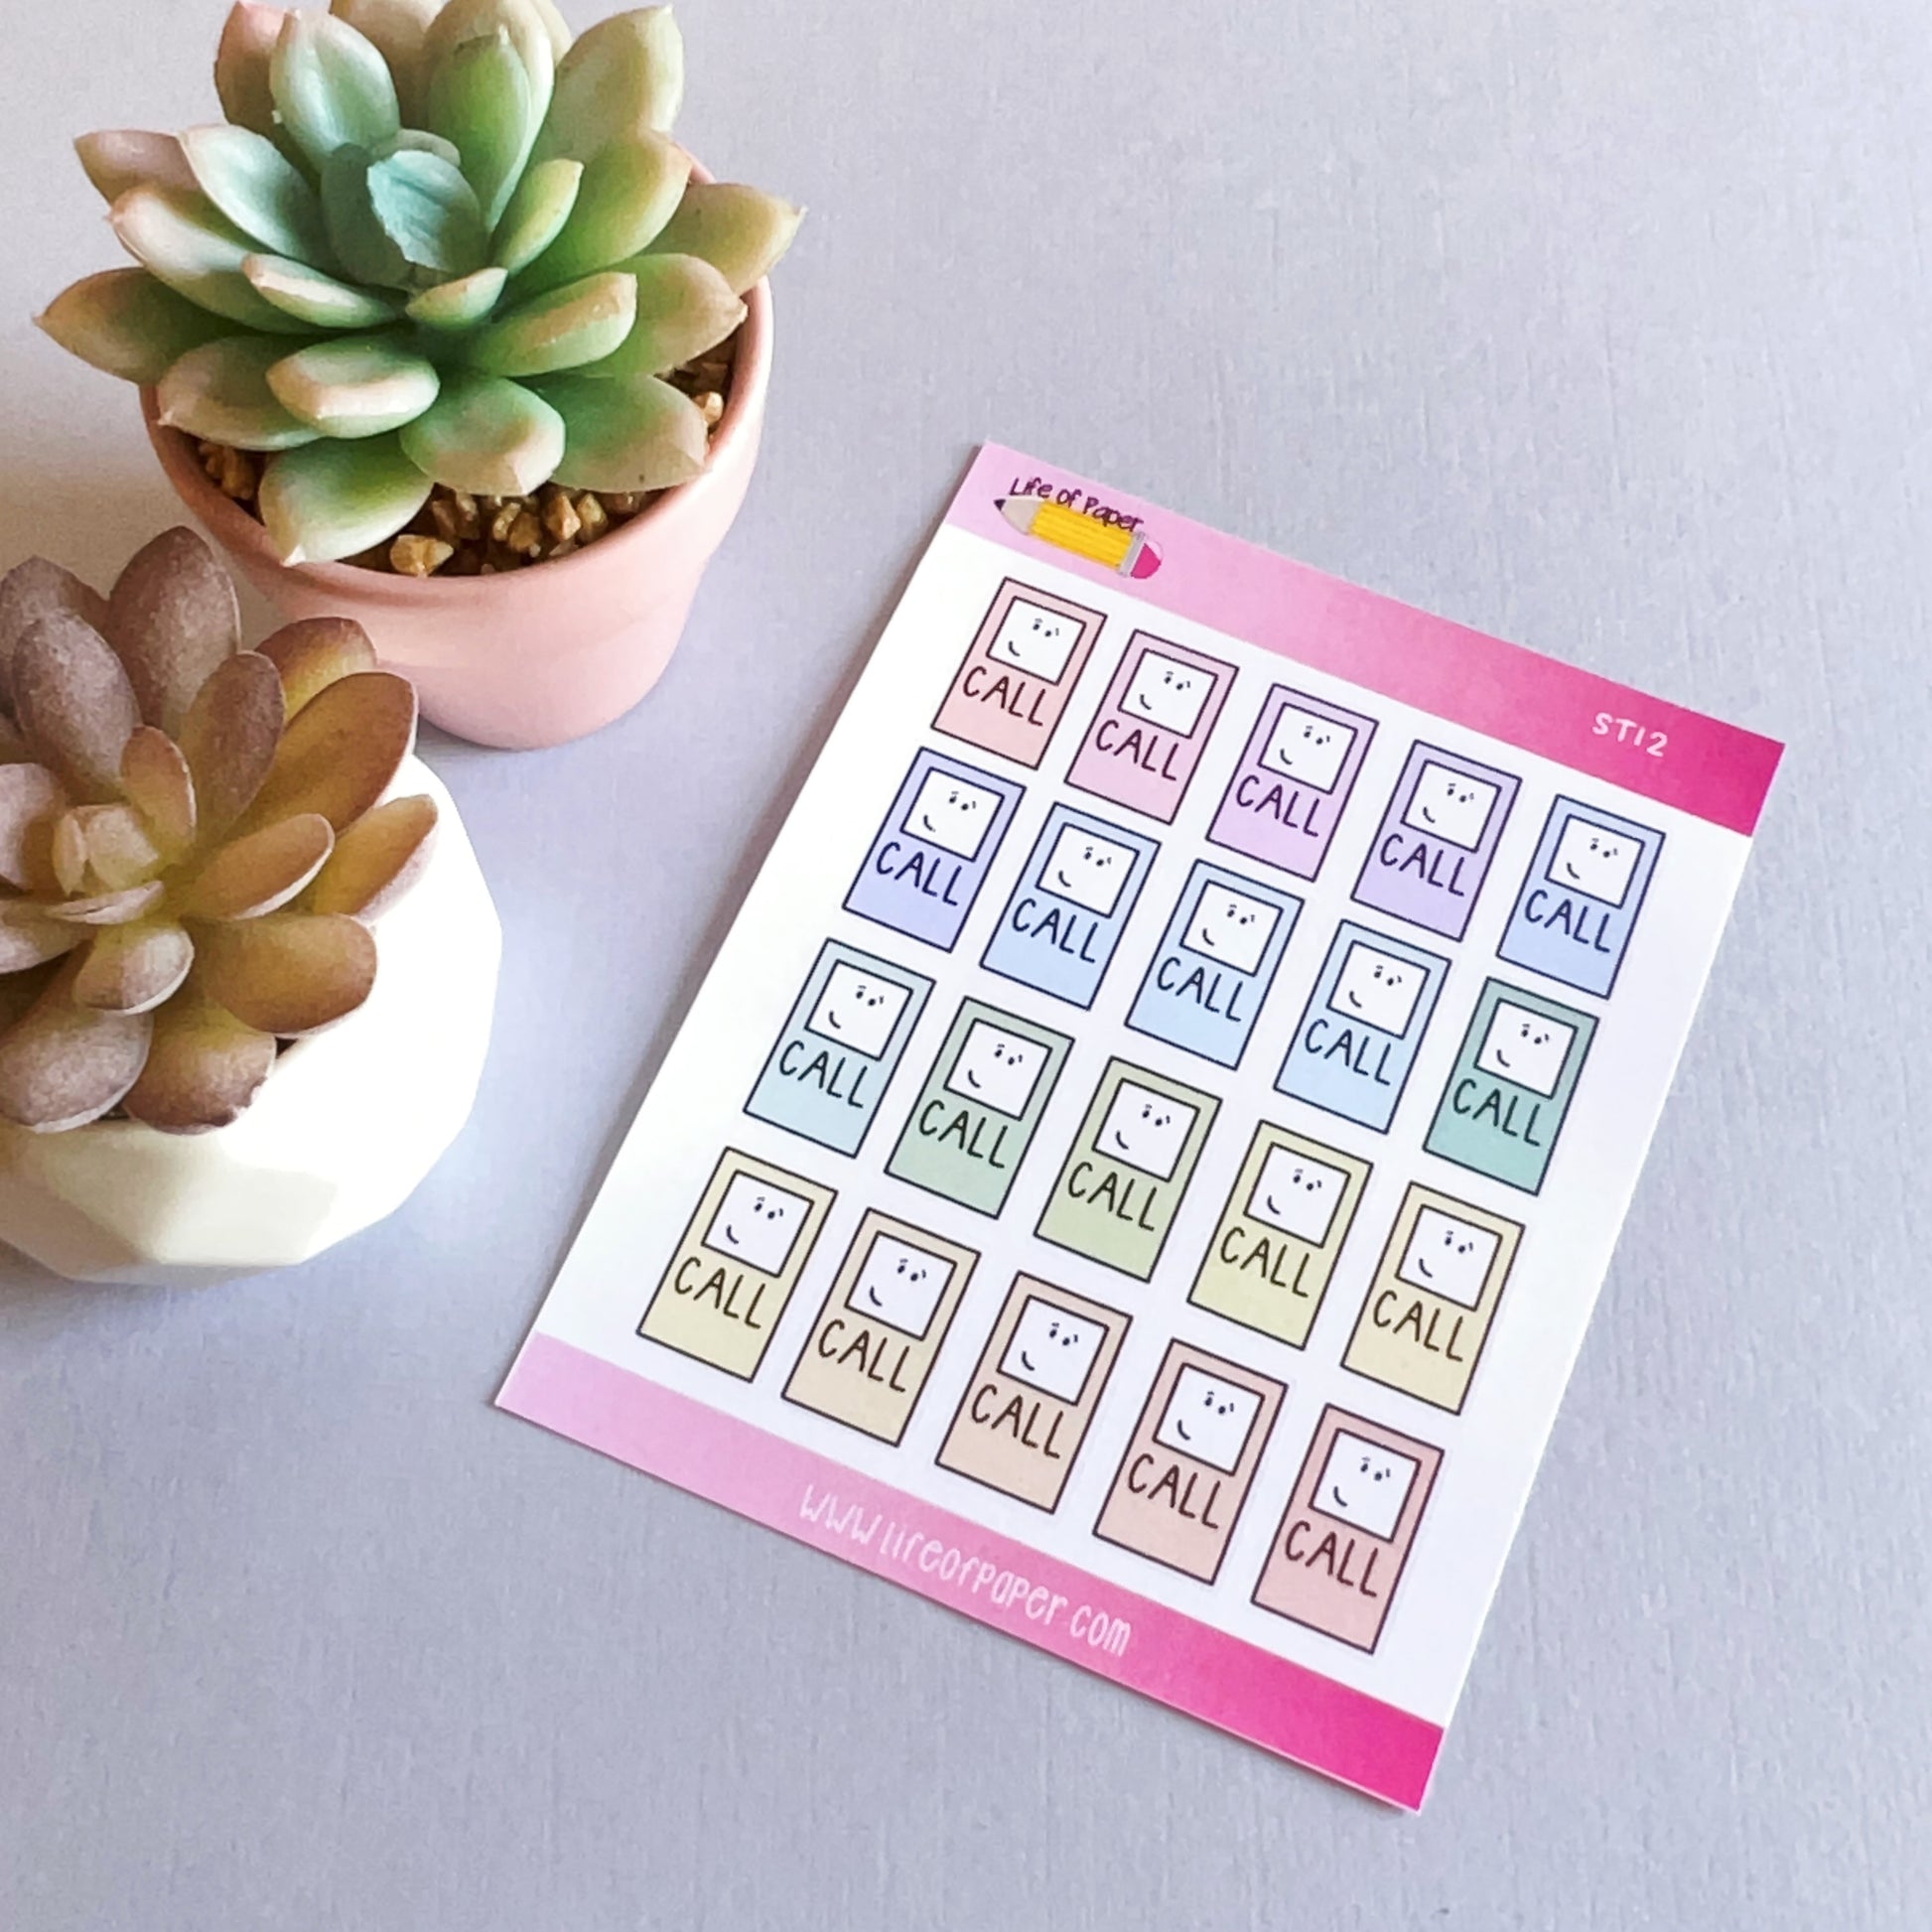 A sheet of colorful Call Reminder Planner Stickers featuring a smiling phone icon above the word "CALL" is displayed on a light grey surface. Next to the sheet, there are two potted succulents in white and pink pots, making it perfect for adding some life to your planner or diary.